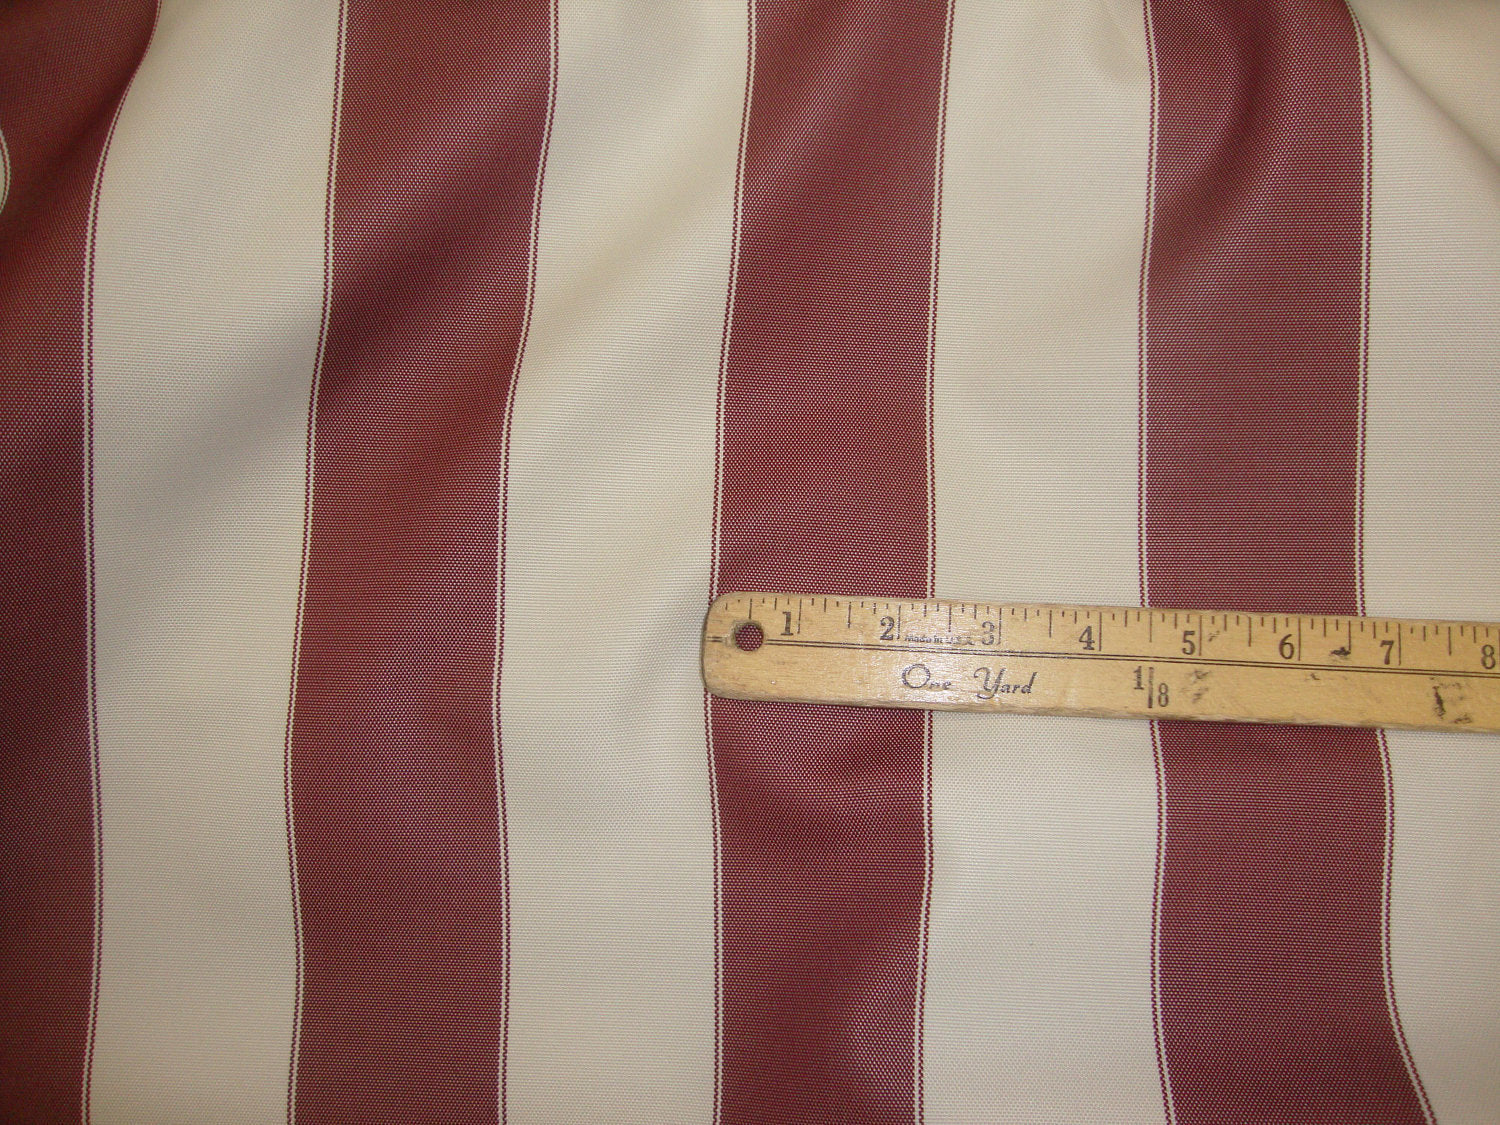 Burgundy White Striped 600 Denier Waterproof UV Protection Polyester Canvas 60" Wide || Sunbrella Fabric by the Yard